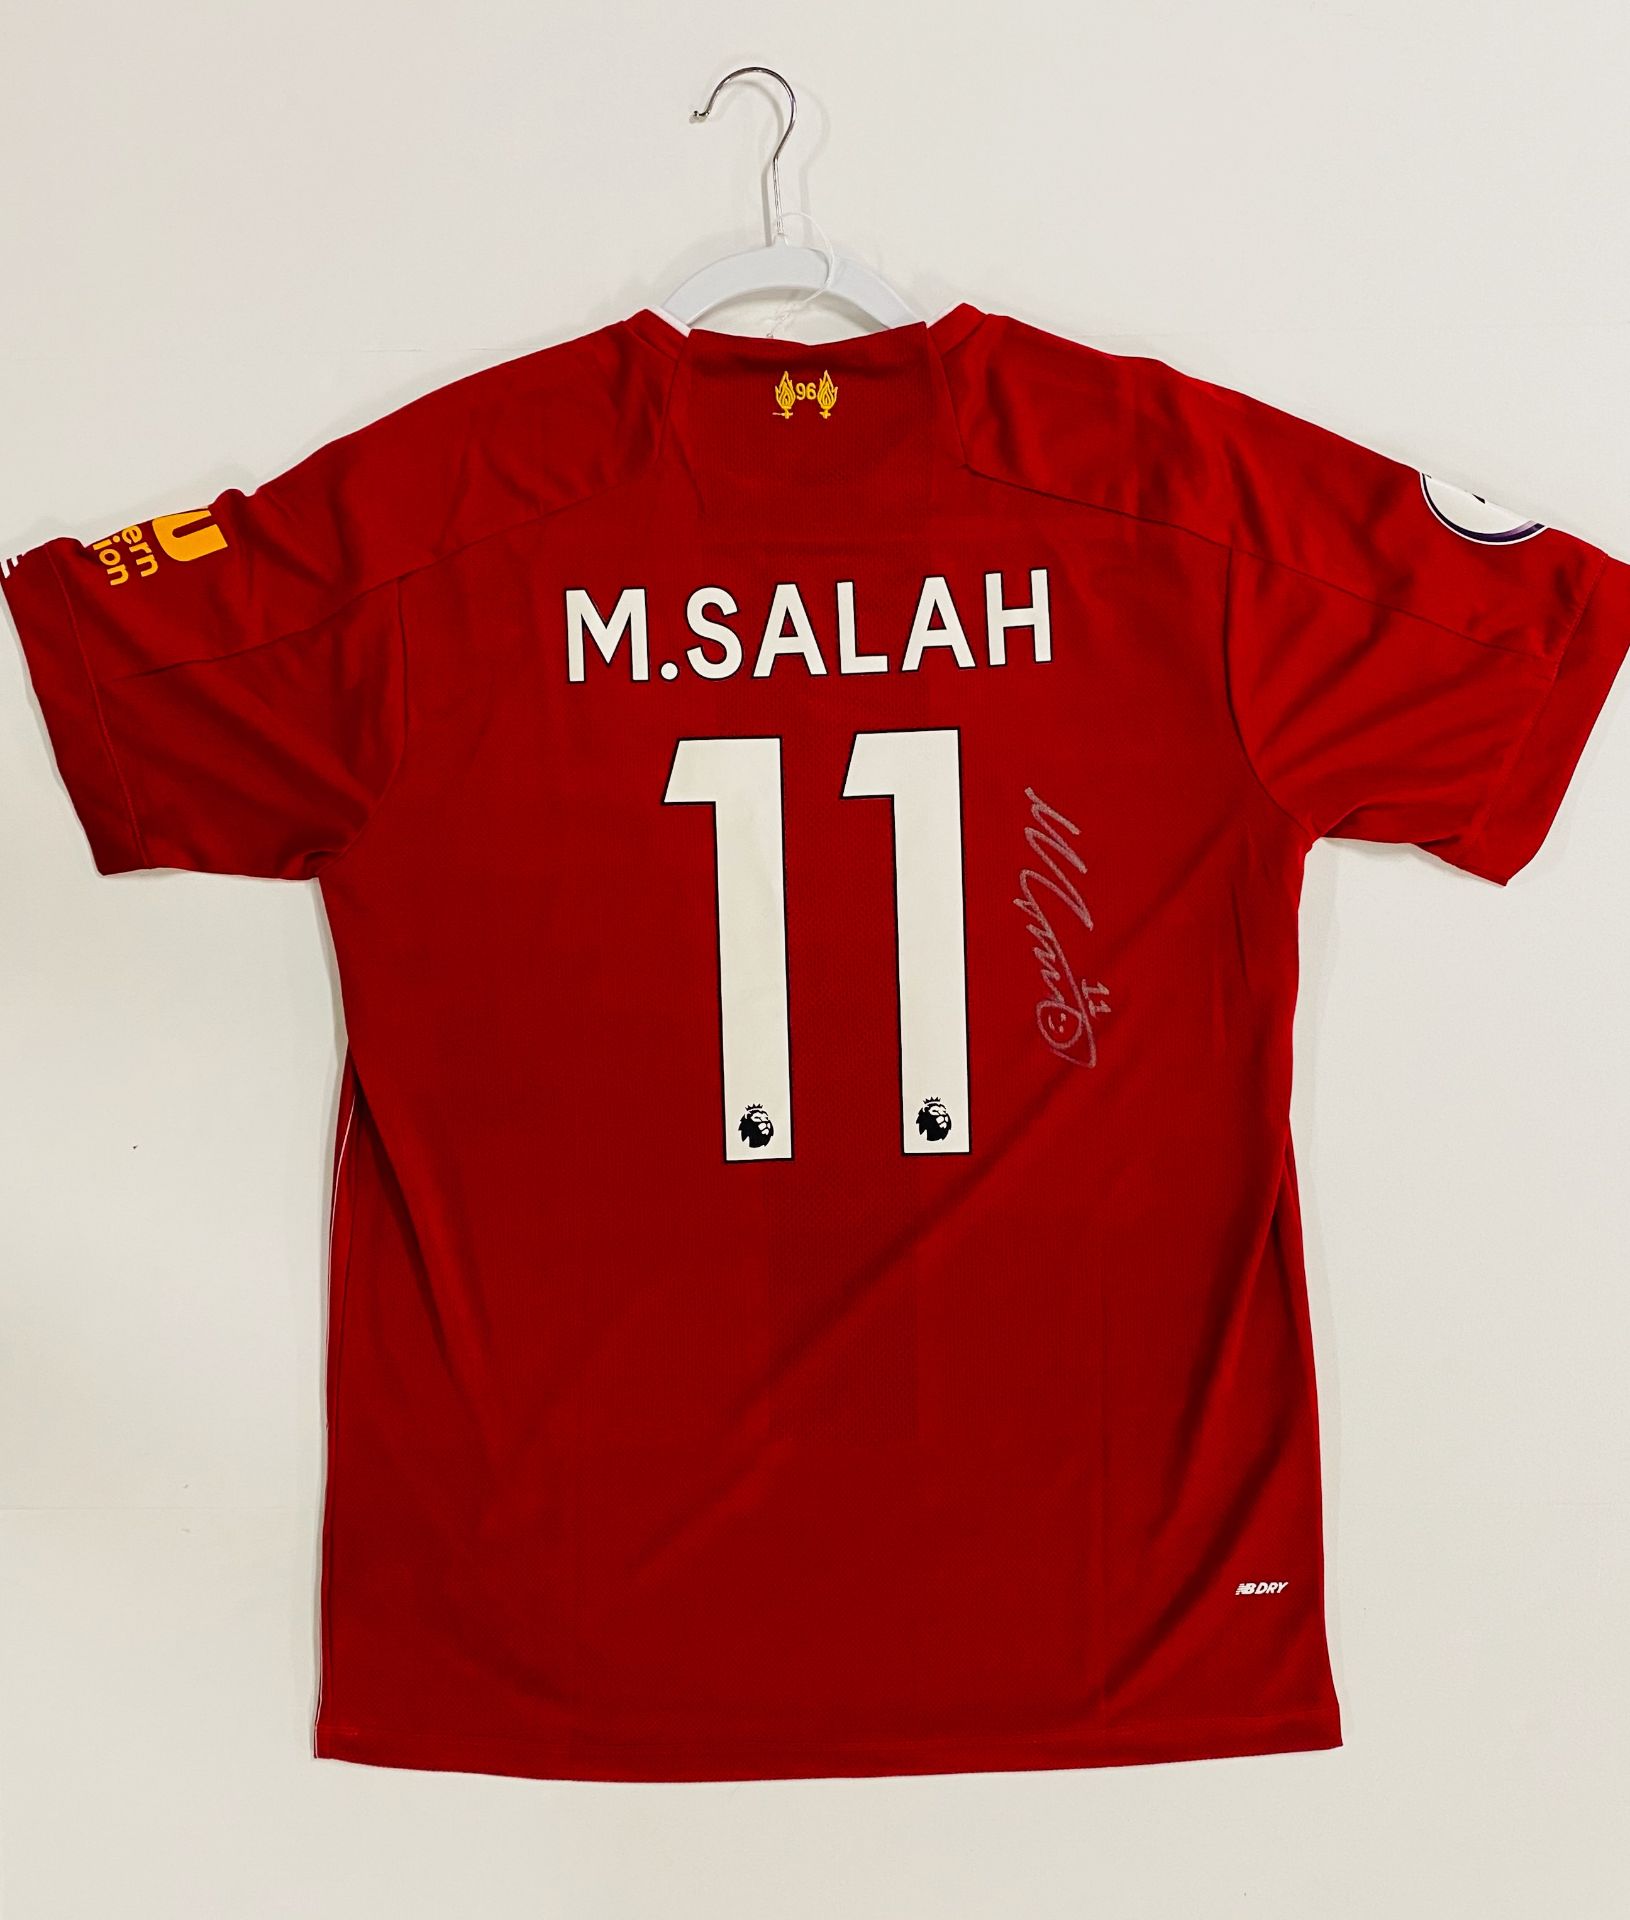 Liverpool 2019/20 team signed jersey - Image 2 of 2